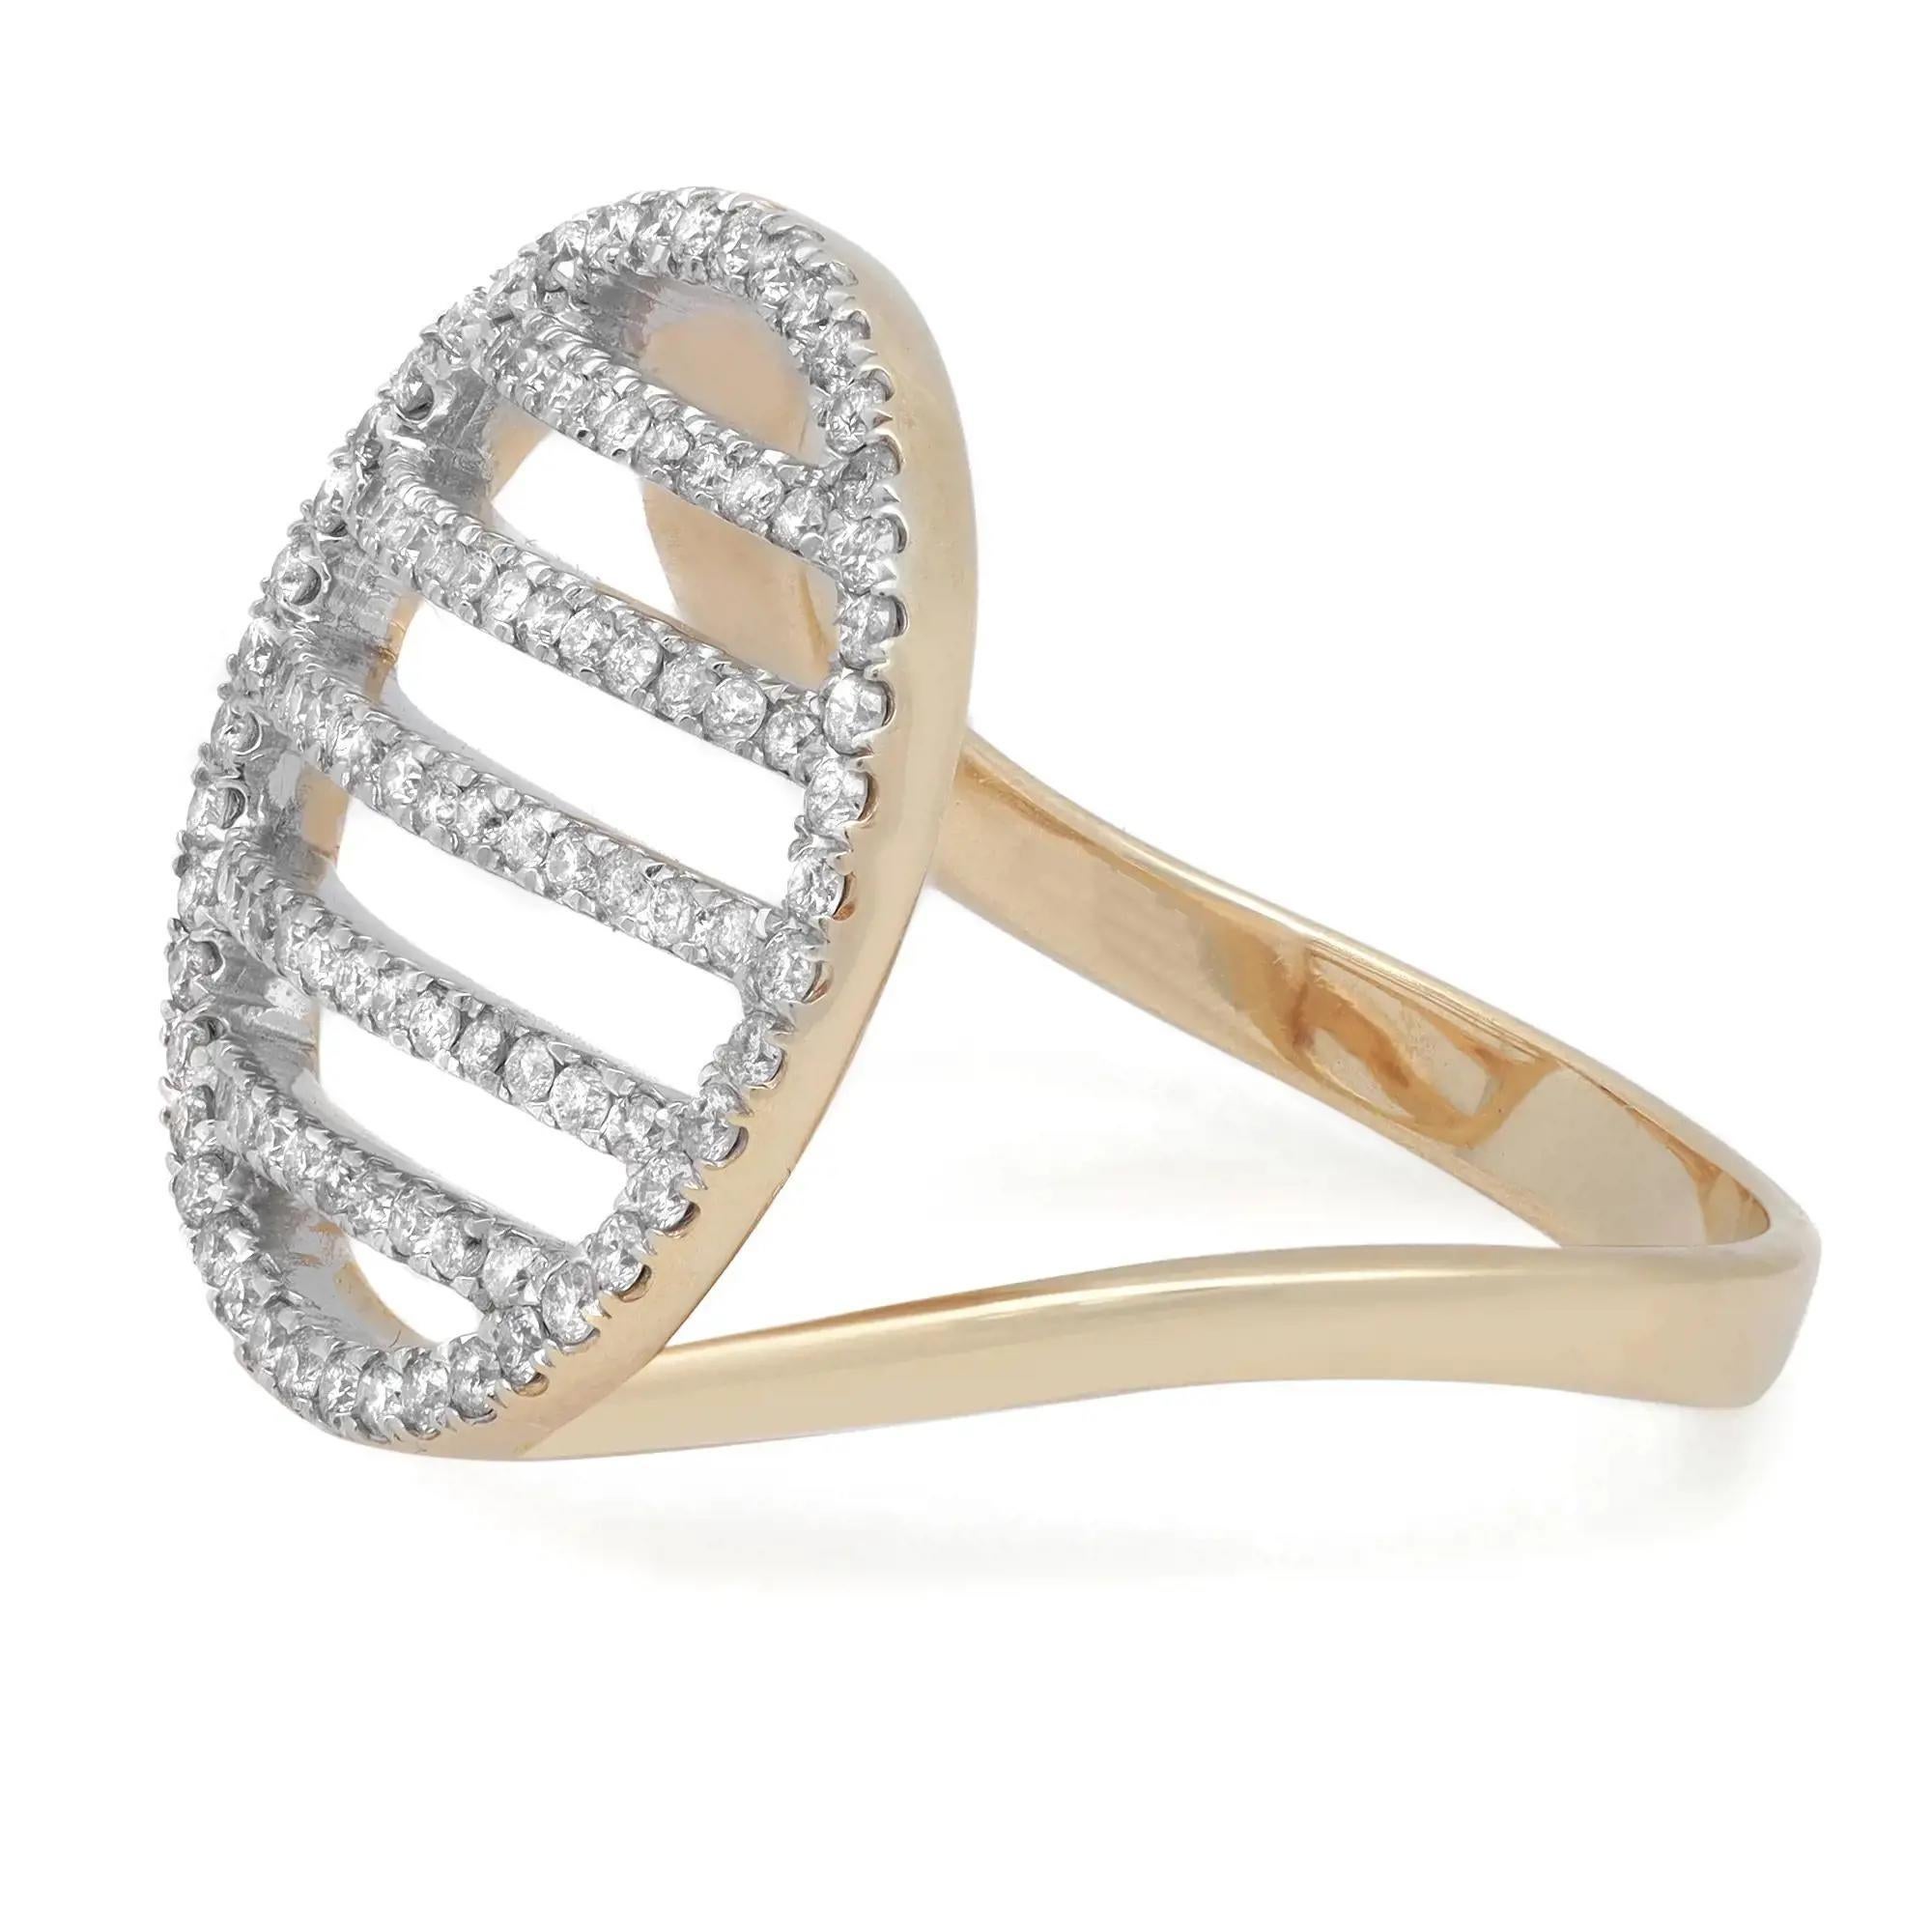 Bold and beautiful Round cocktail diamond ring crafted in 14k Yellow Gold. This ring features sparkling round cut diamonds weighing 0.70 carat with color I and clarity SI1. The ring size is 8. Total weight: 6.51 grams. Comes with a presentable gift